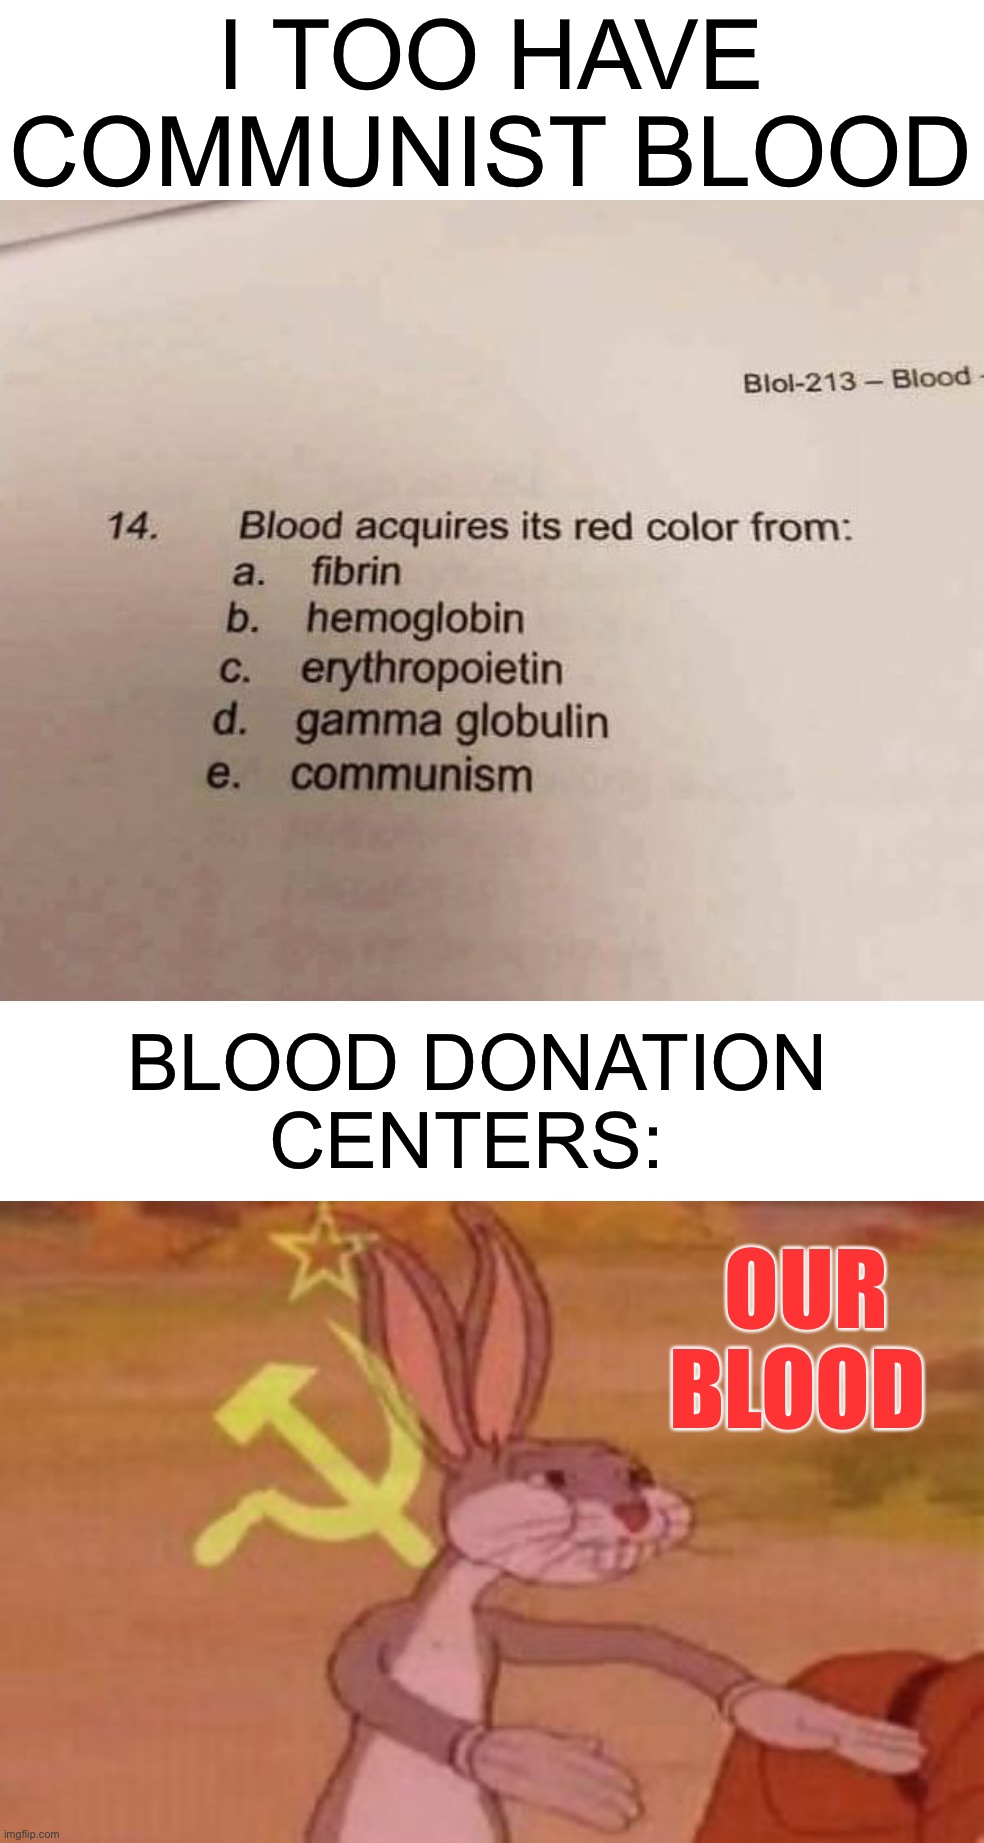 Our blood - Imgflip